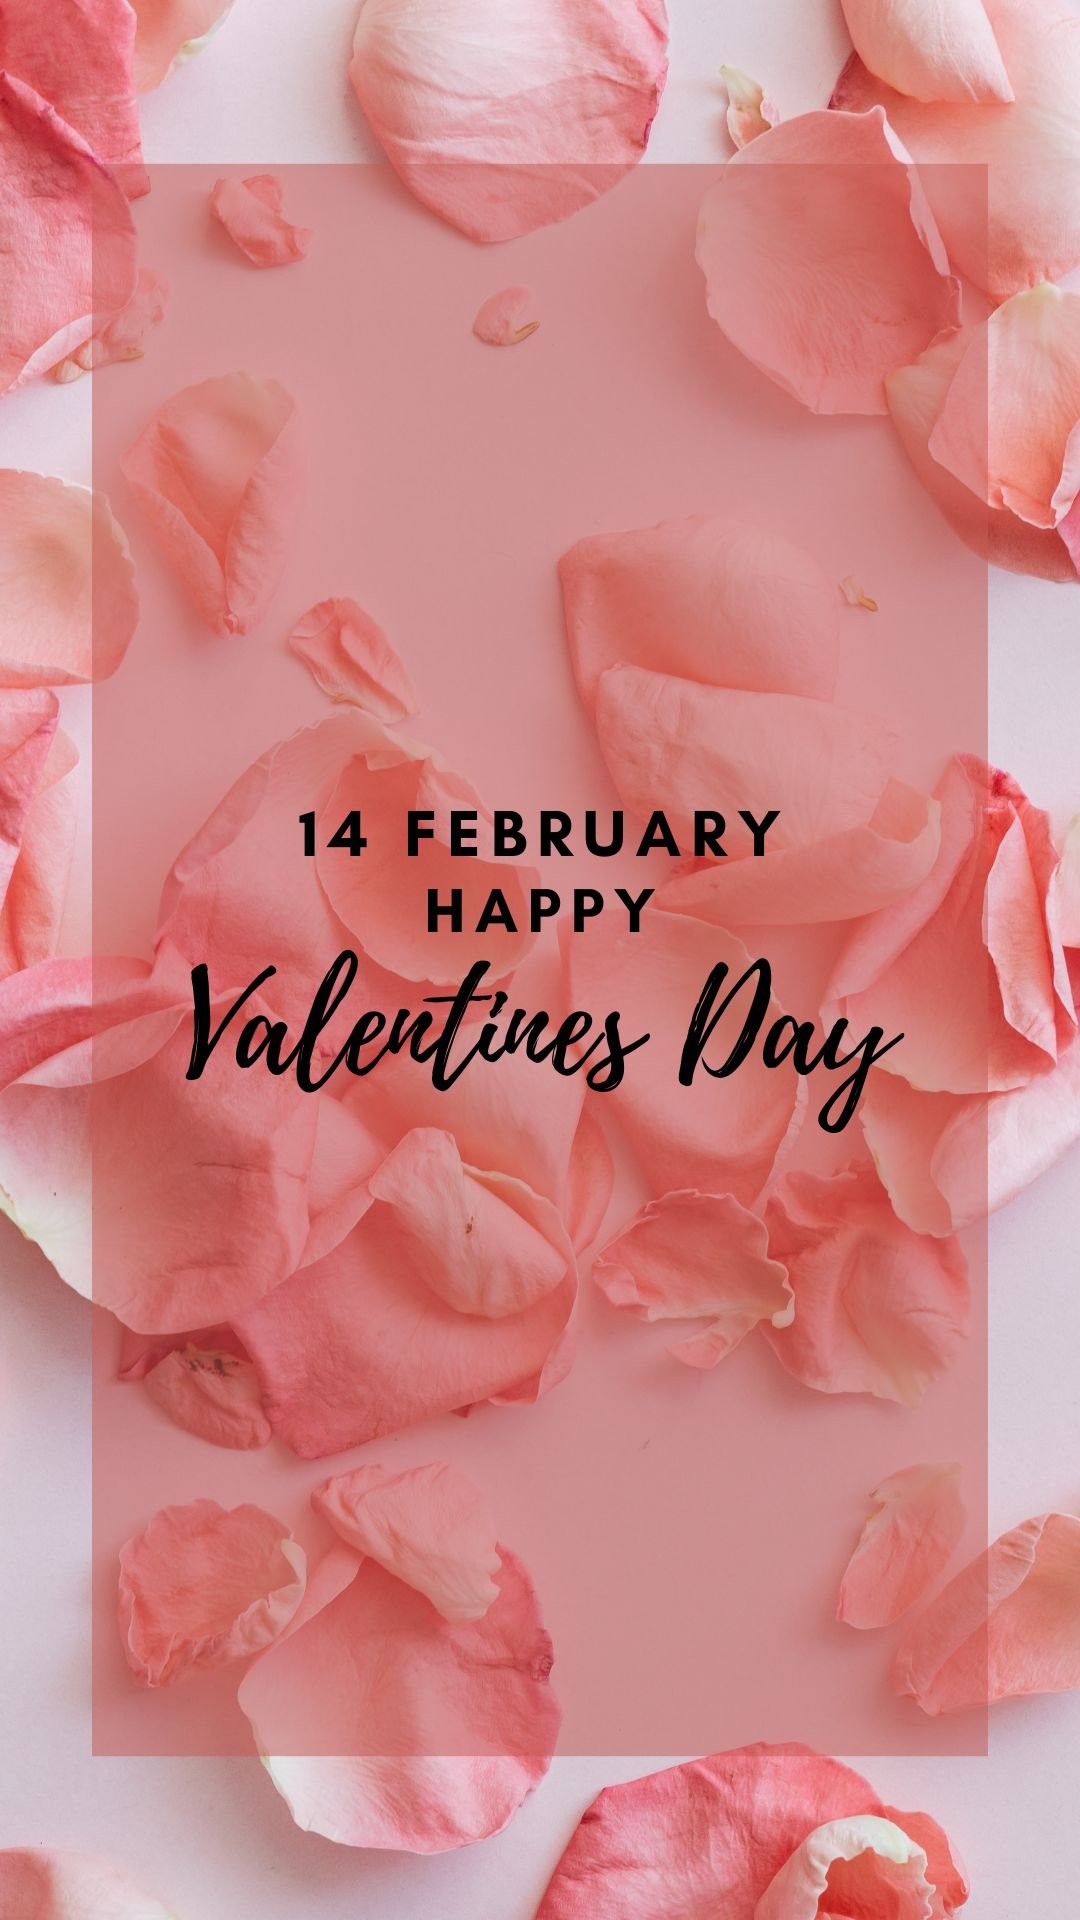 Pink Rose Petals Valentine's Day Iphone Wallpapers Min